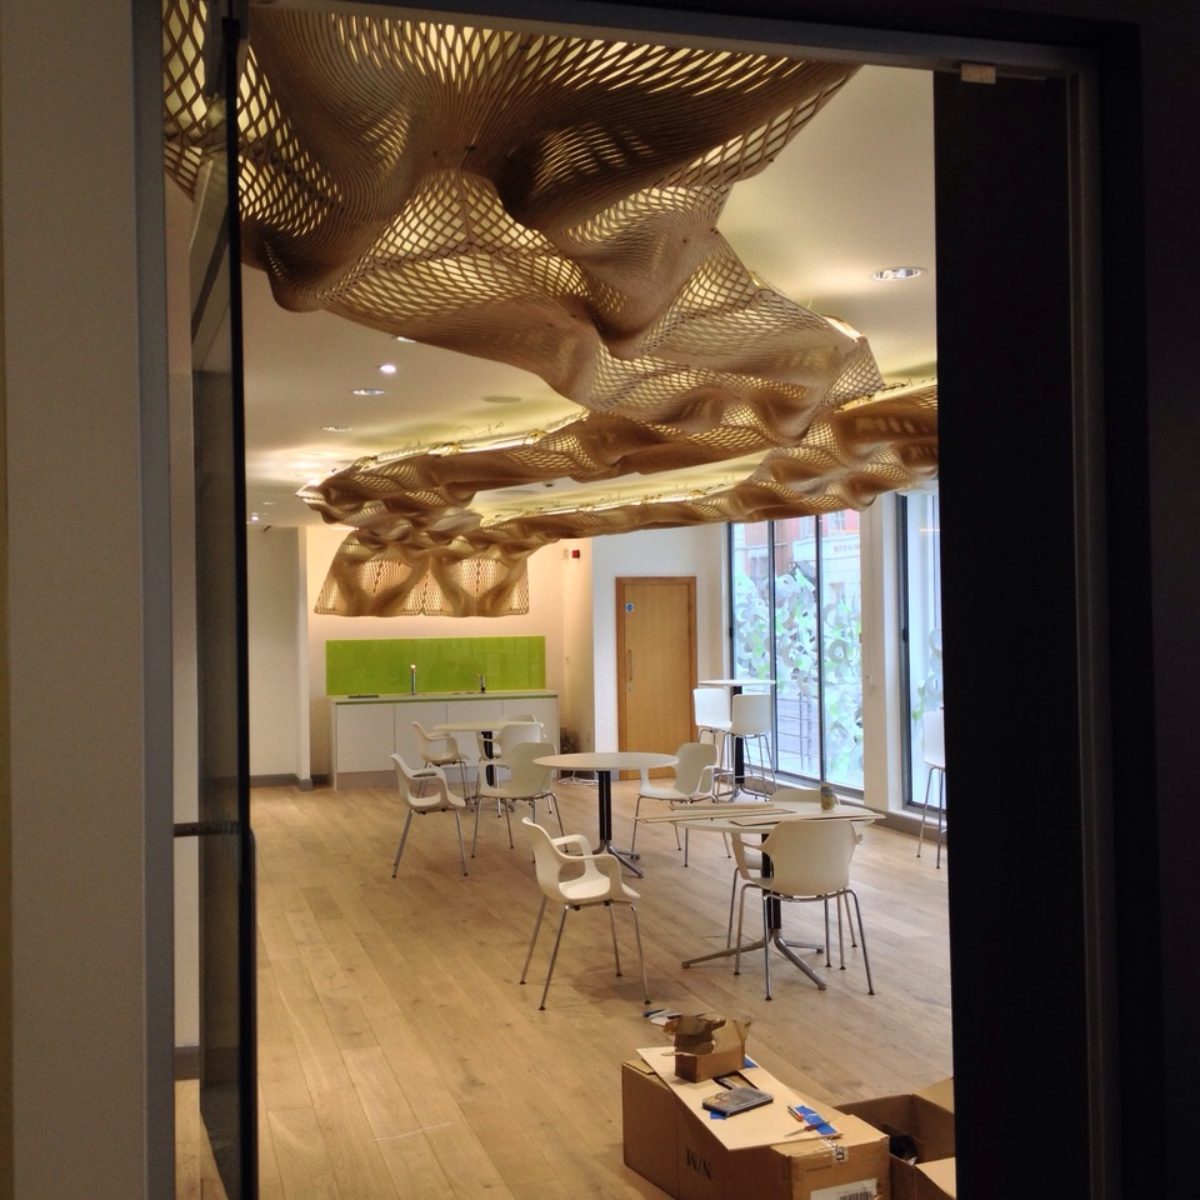 The Wooden Waves - Buro Happold - The ceiling Installation at 71 Newman Street - Picture by Dr. Bilal Mian ©Mamou-Mani